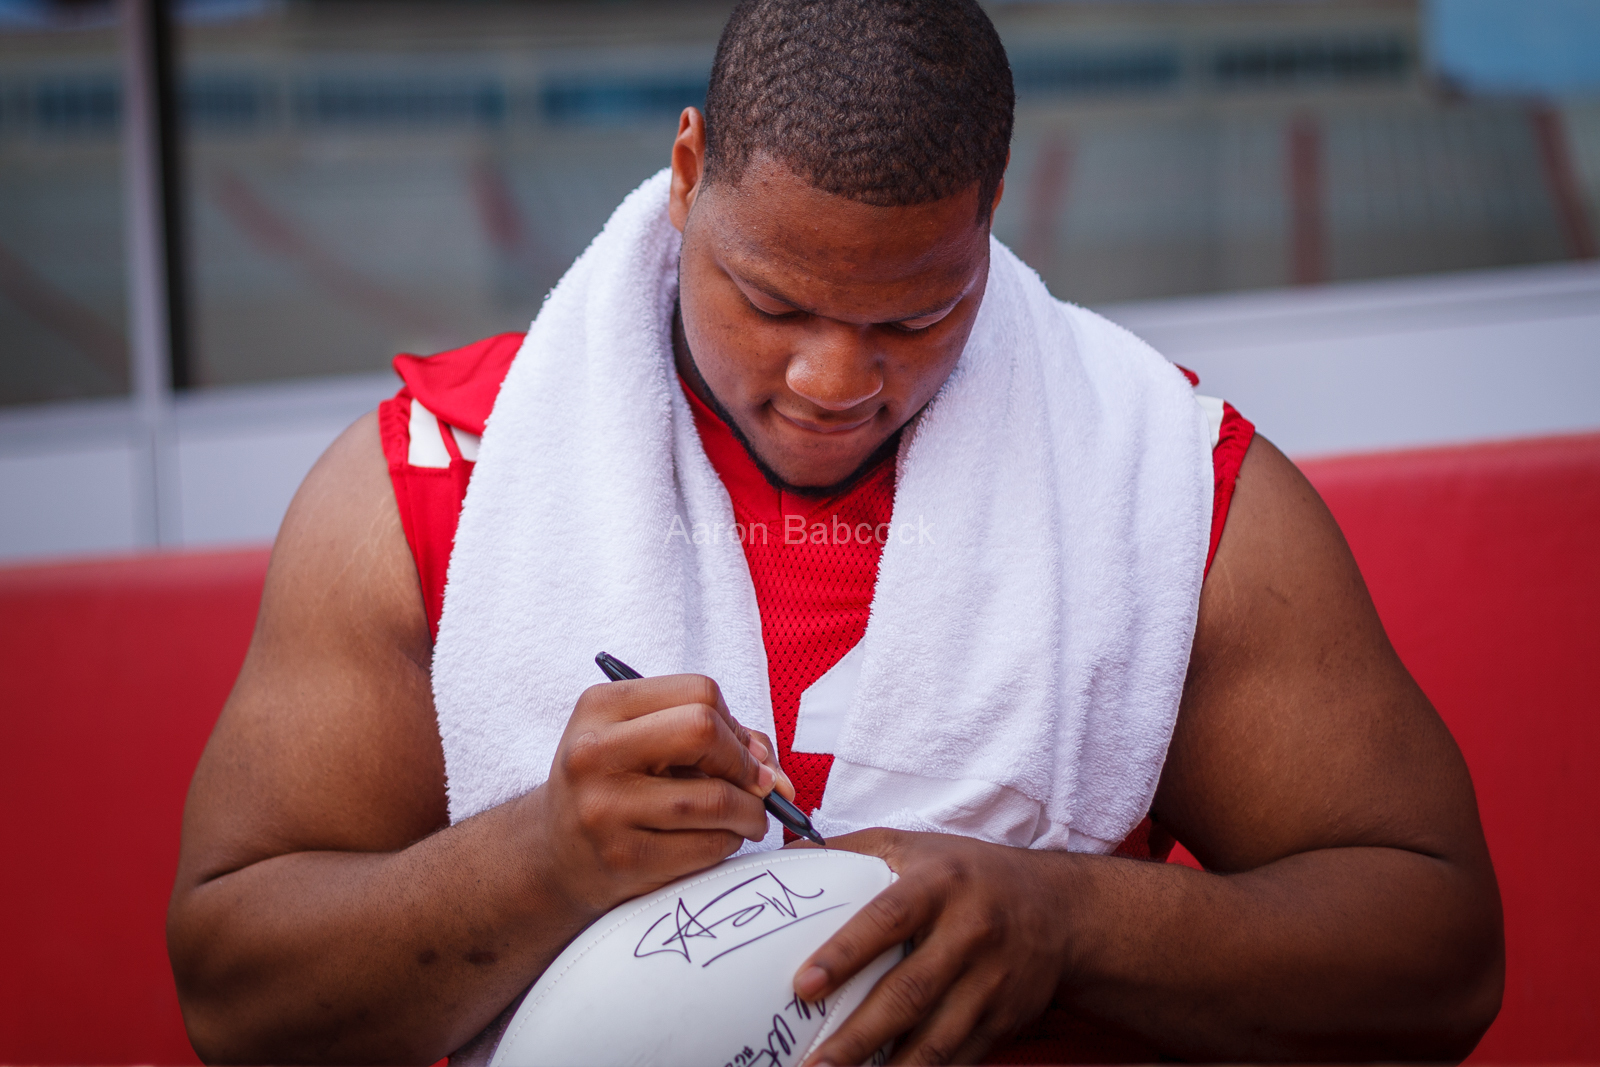 Ndamukong Suh signs autographs during Fan Day on Aug. 8, 2009. © Aaron Babcock